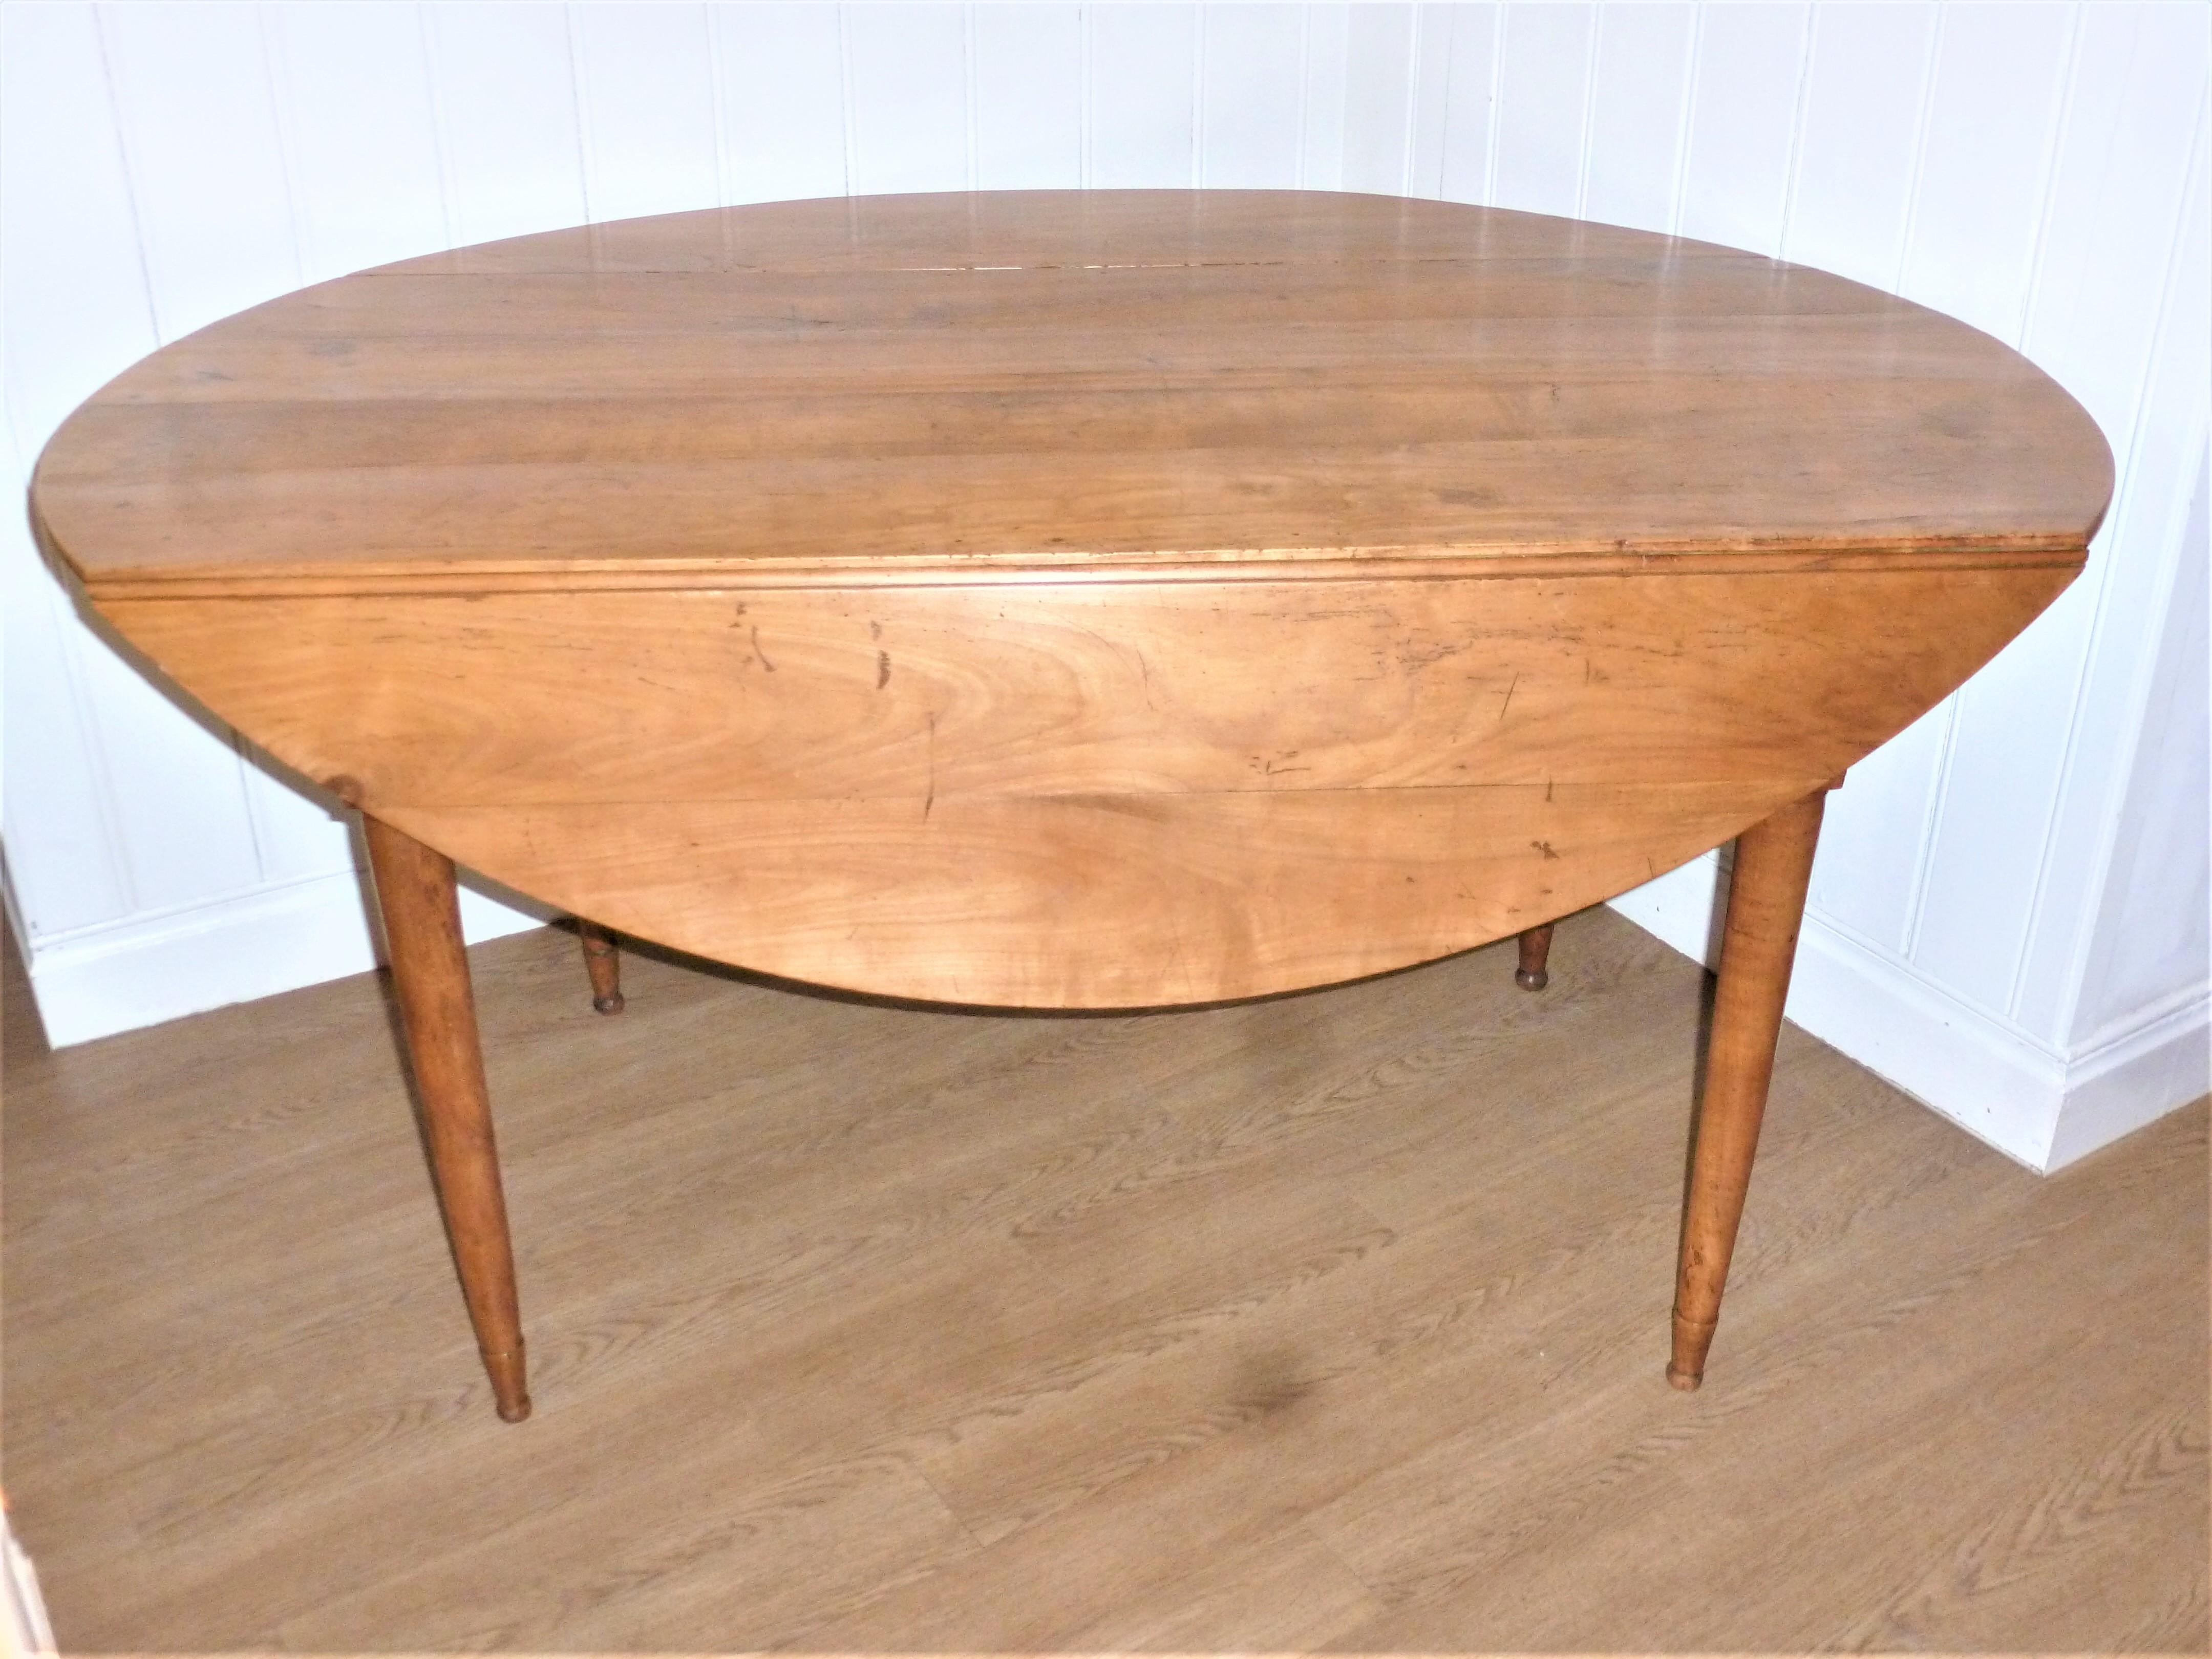 French Provincial Antique 18th Century French Oval Drop-Leaf Cherry Dining Table on Louis XVI Legs For Sale